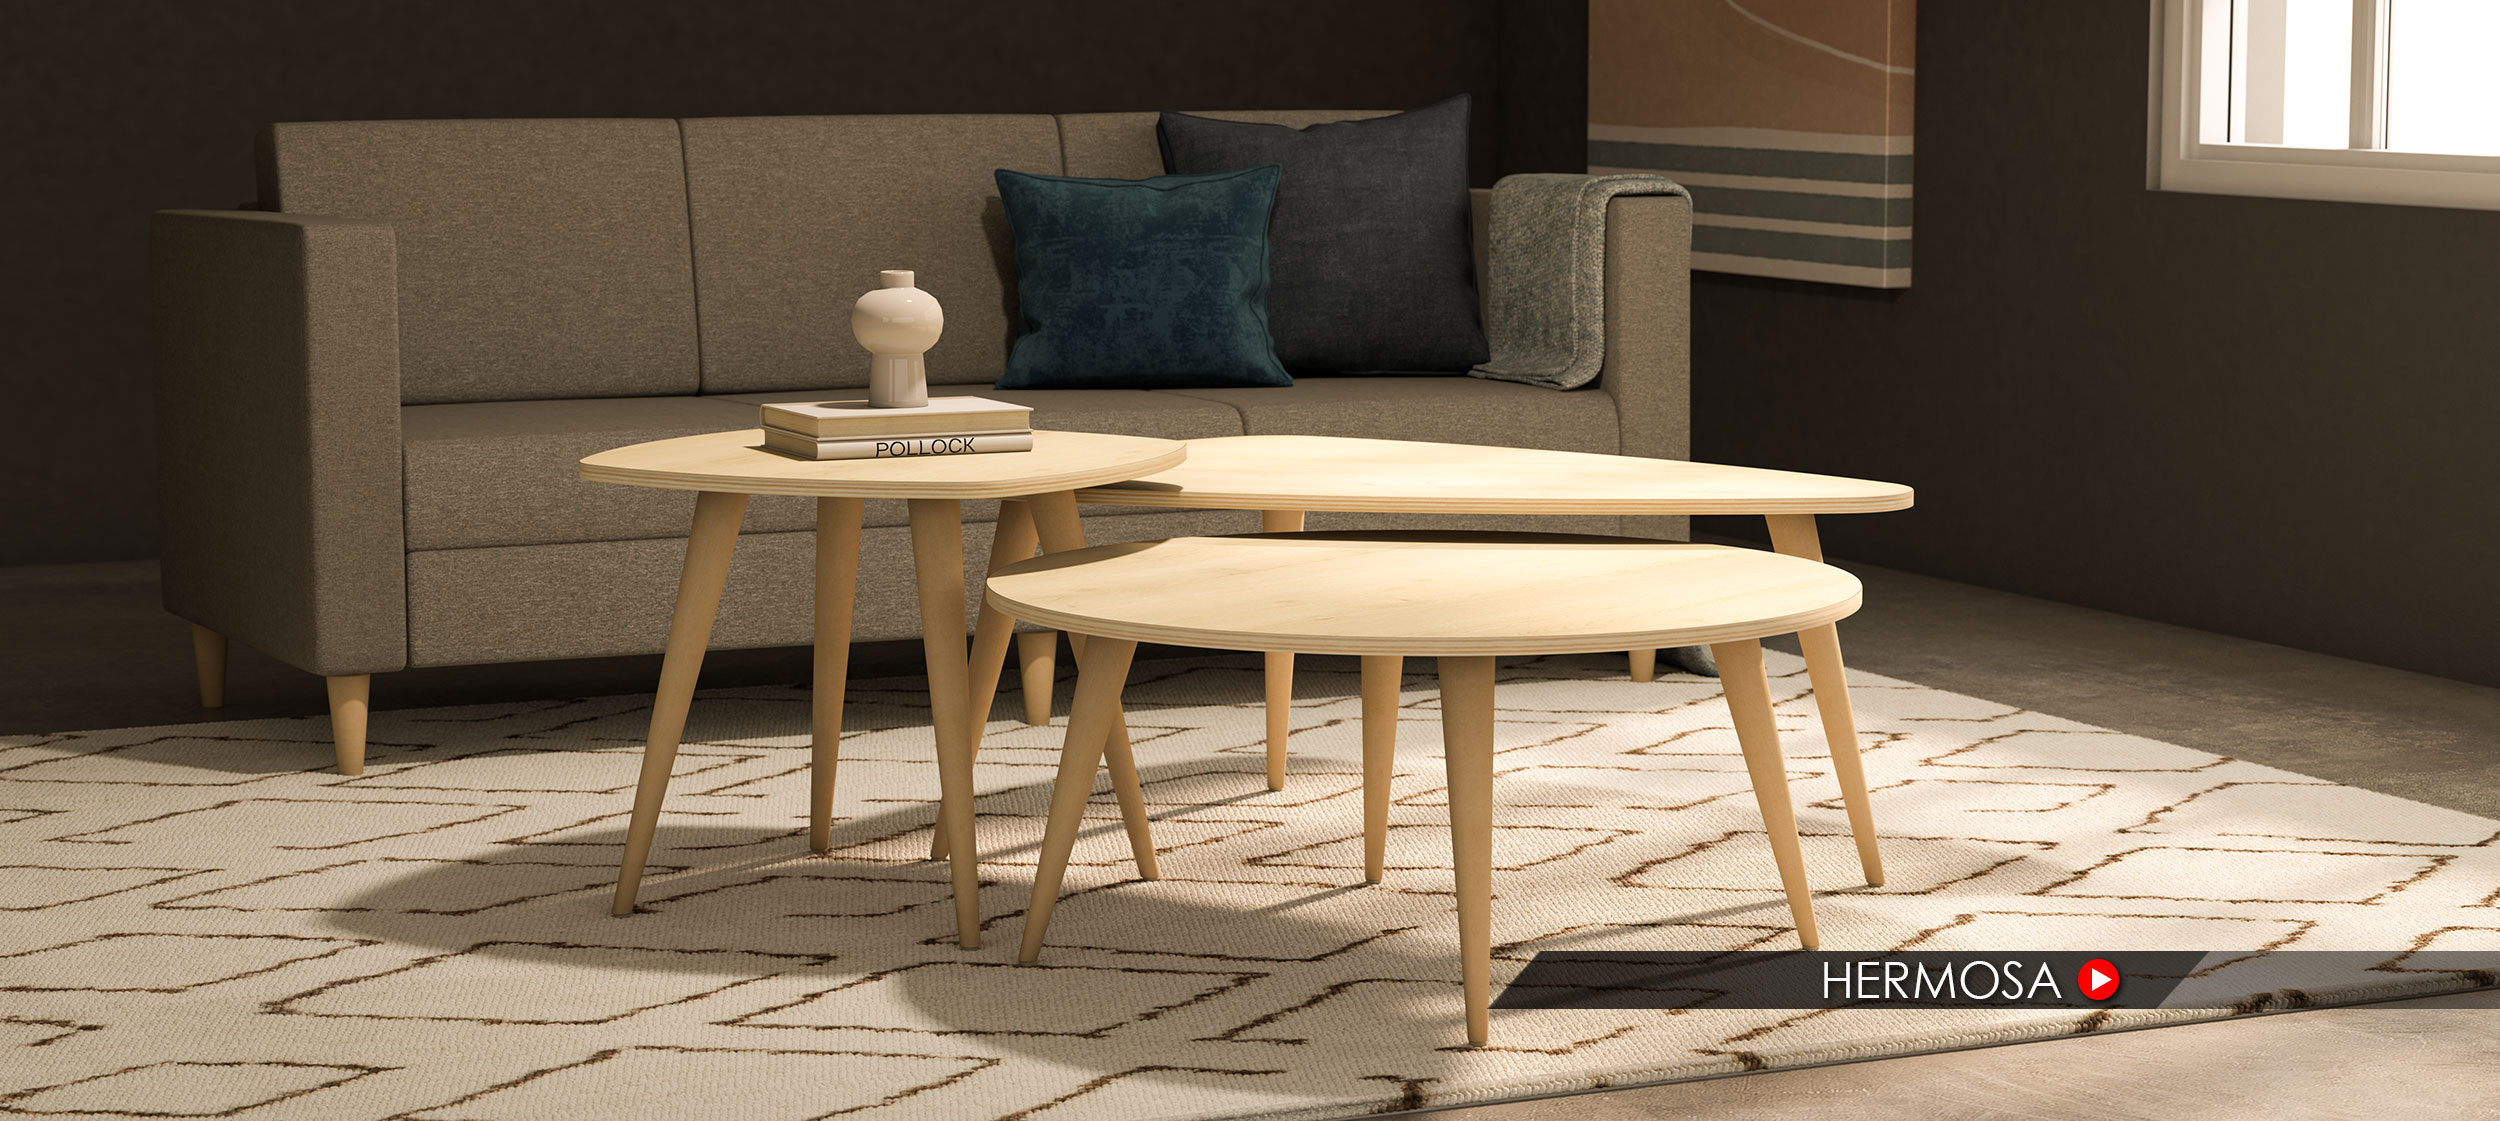 Hermosa Wood Occasional Tables Environment